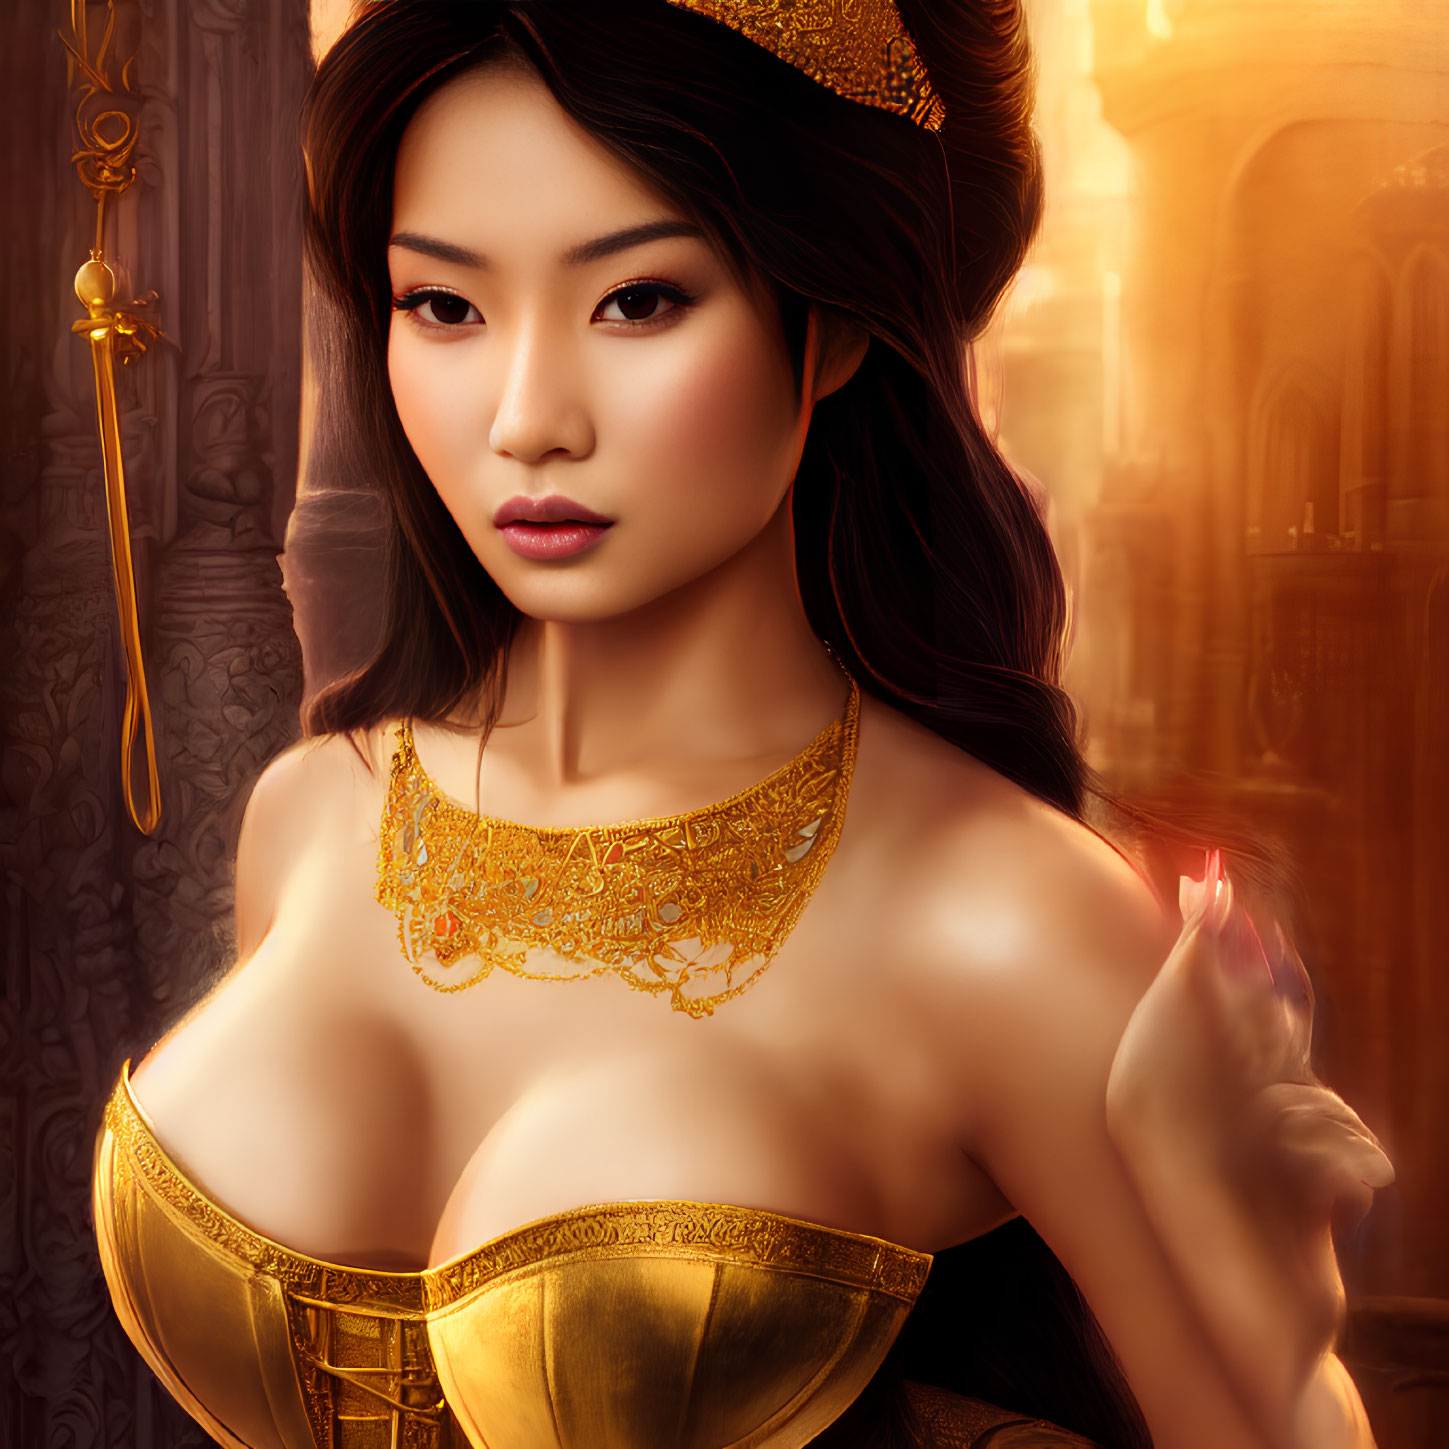 Elaborate Golden Headpiece and Necklace on Woman in Digital Portrait